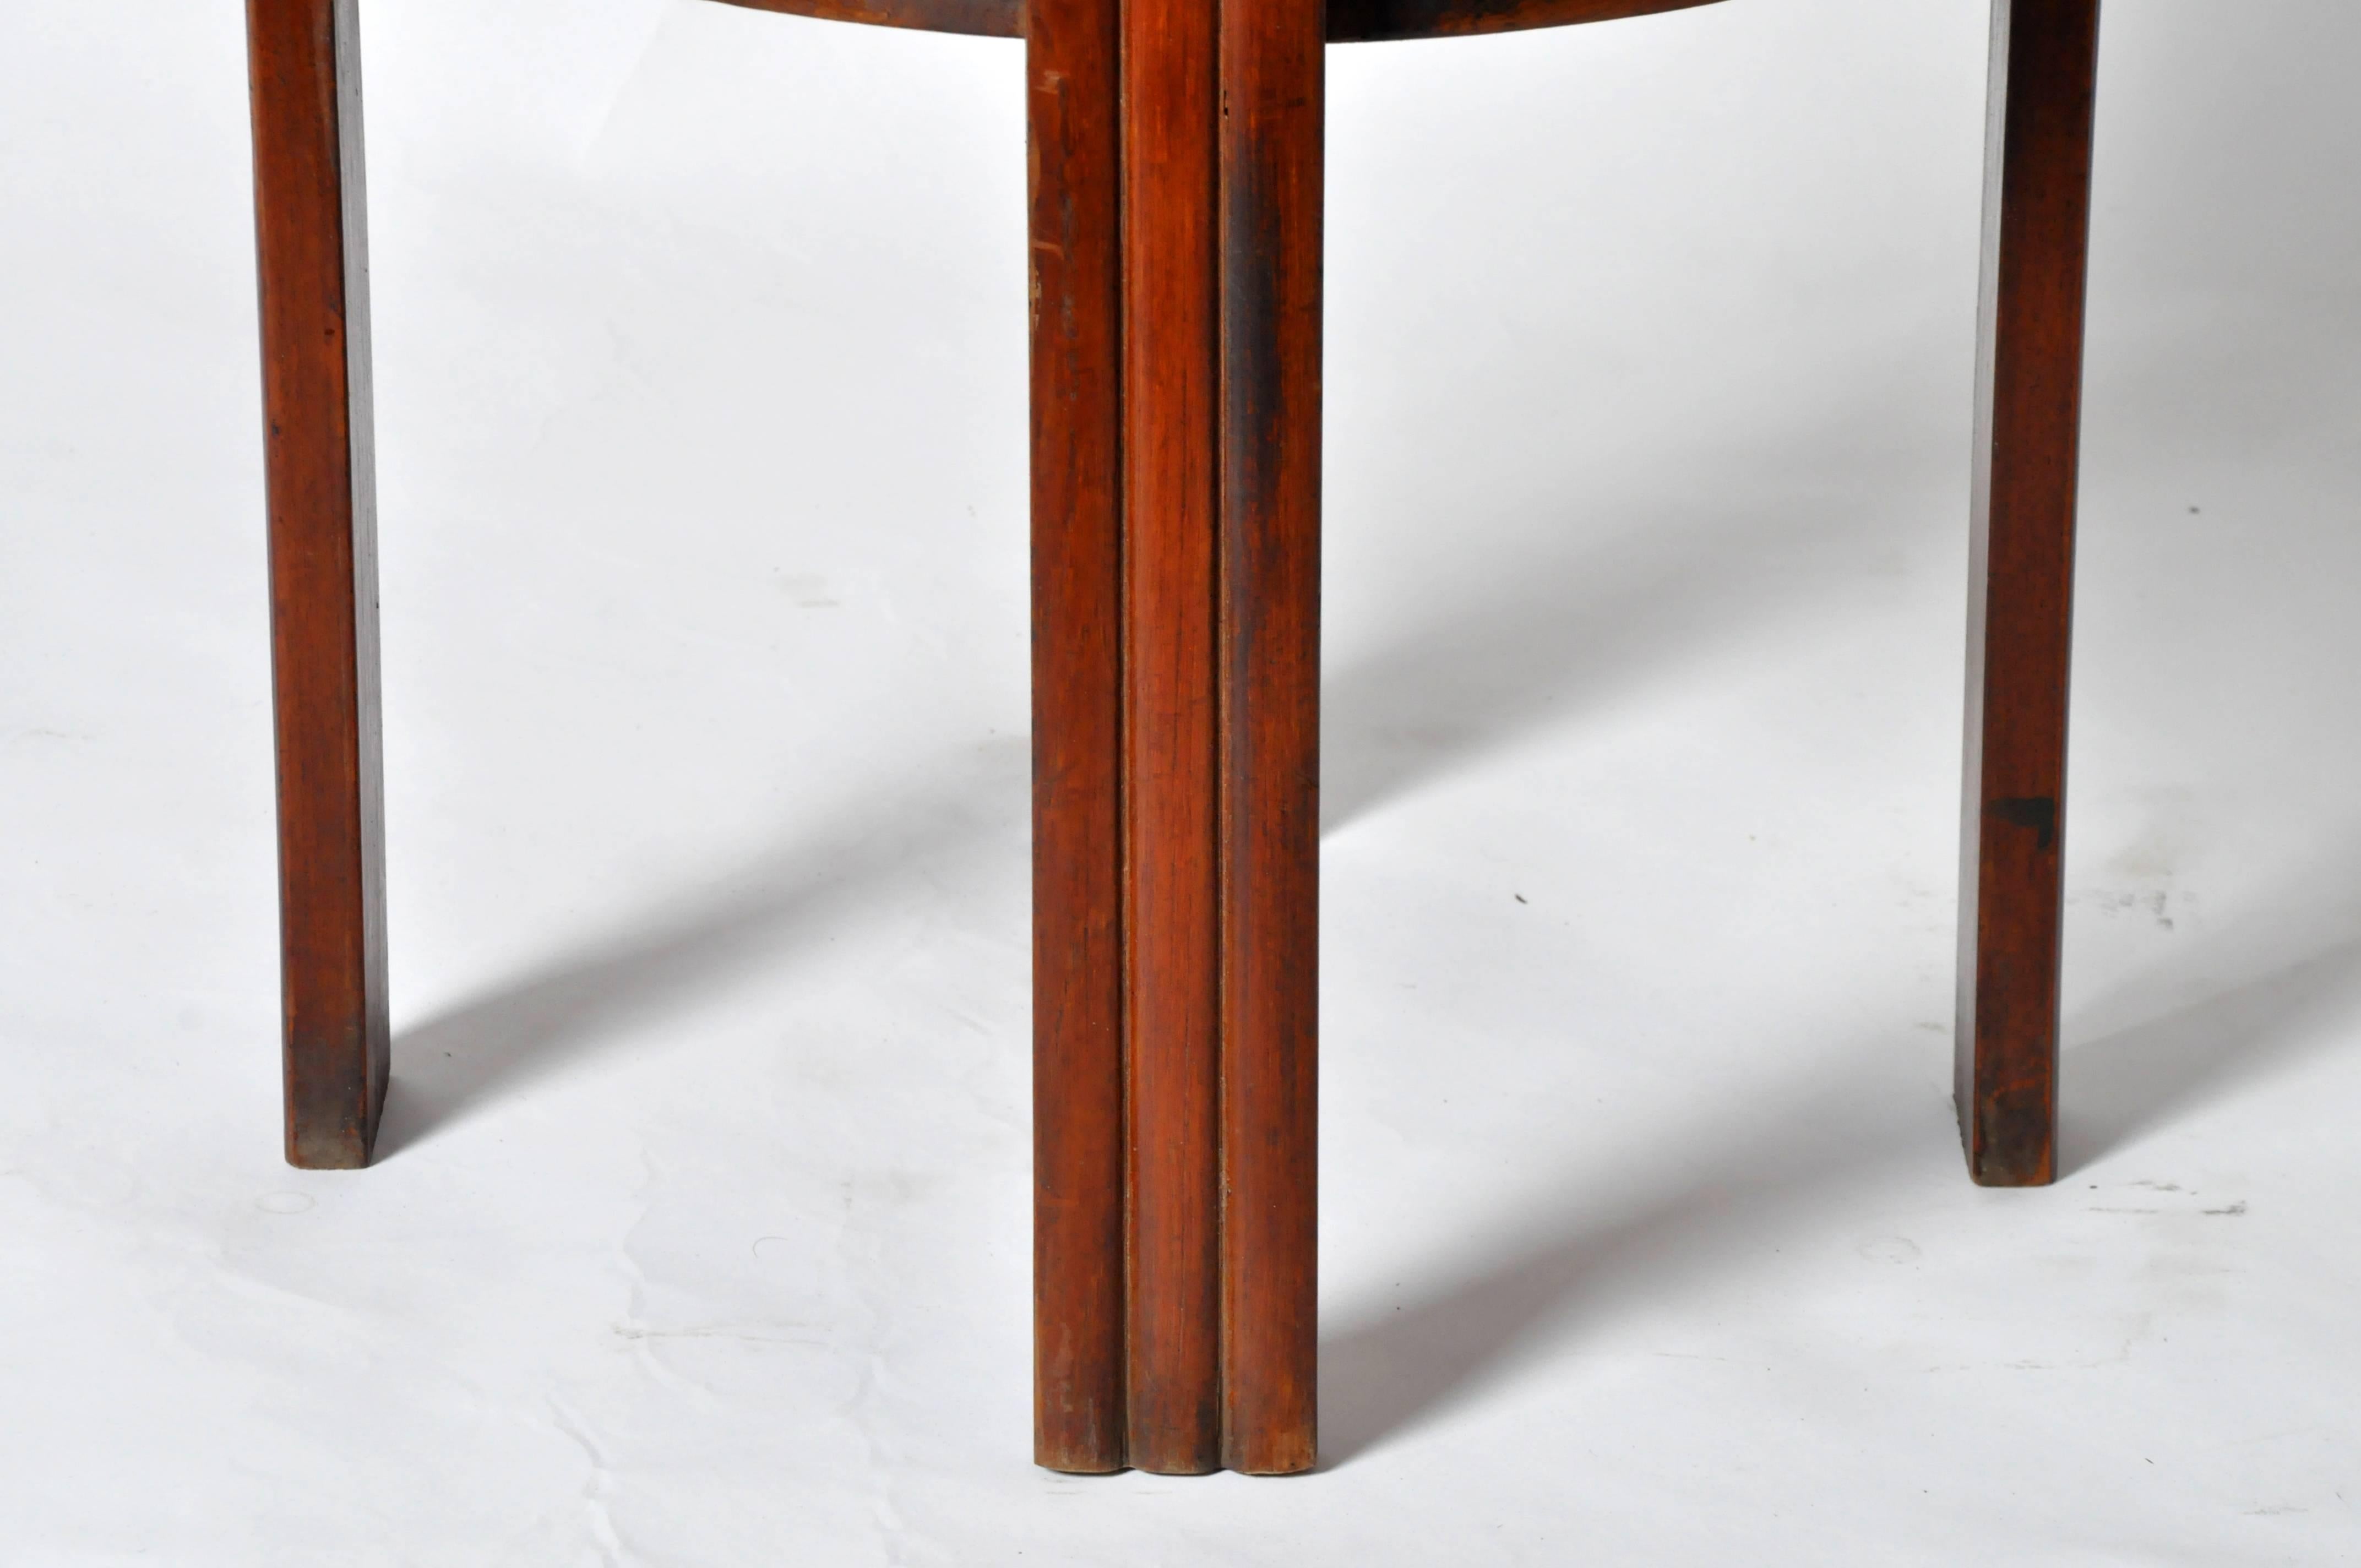 This Art Deco round table is from Myanmar and is made from teakwood. It can function as a side table, end table, or a pedestal.